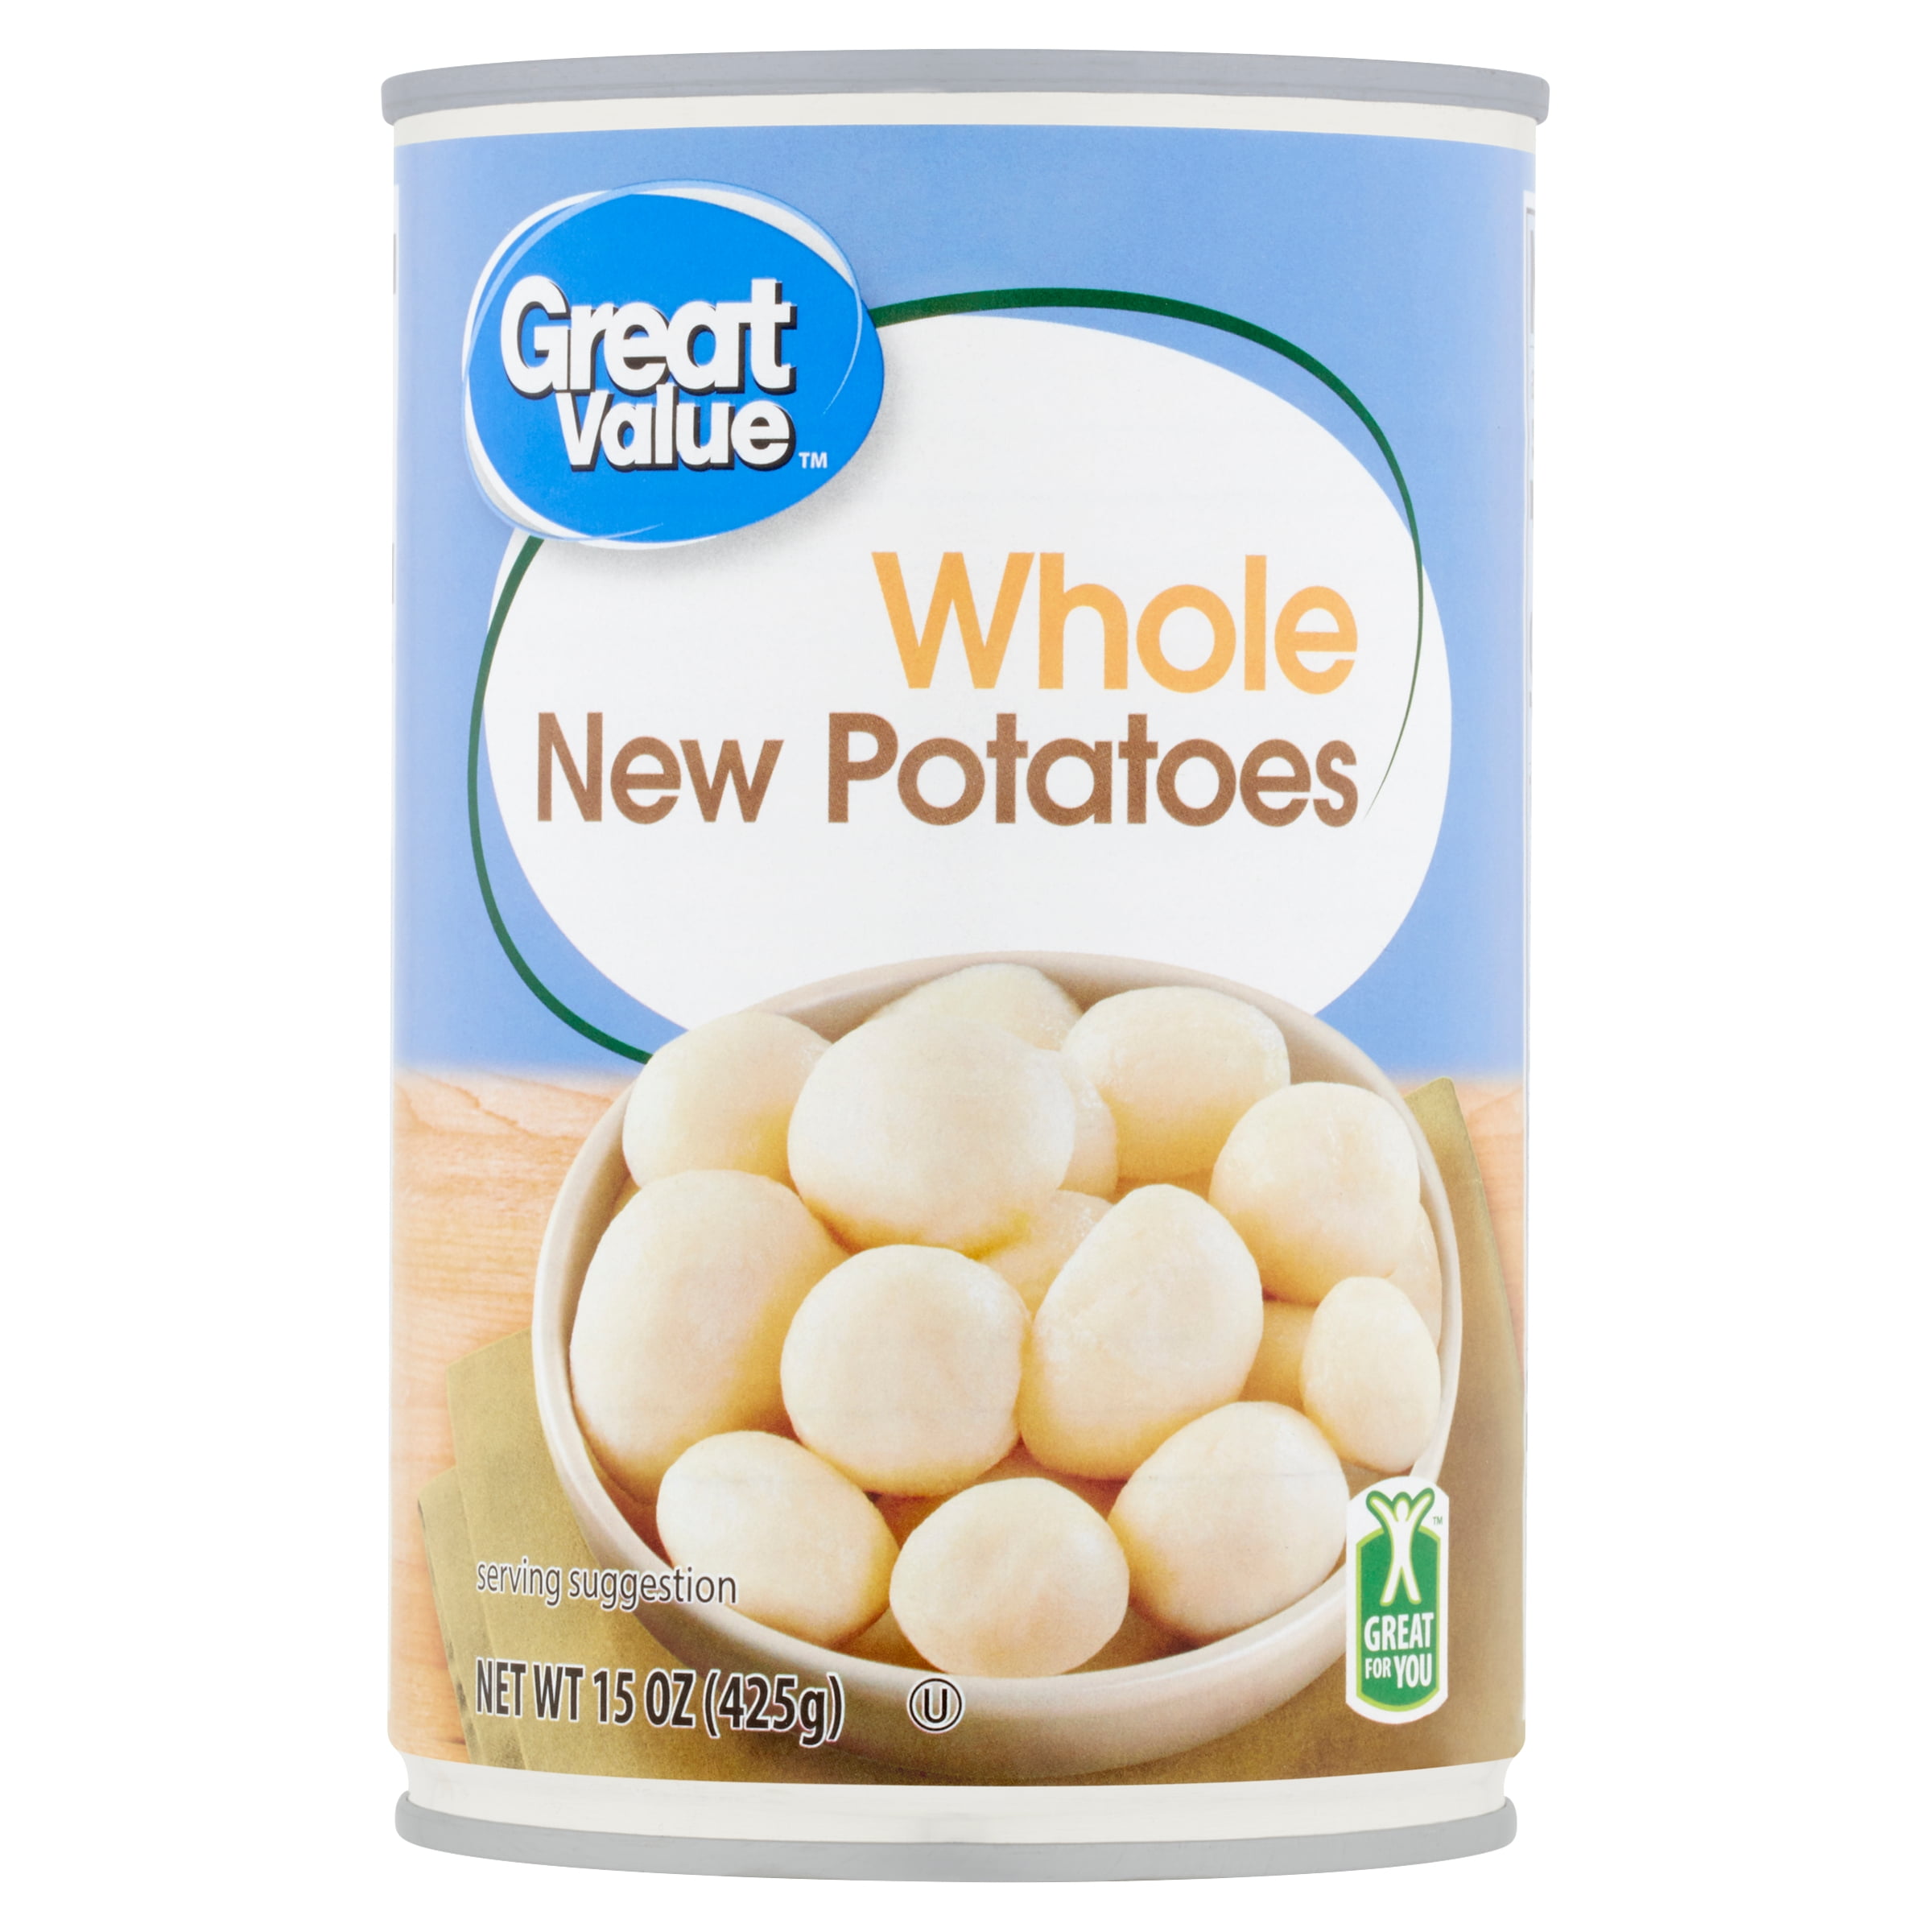 Great Value Whole New Potatoes, Canned Potatoes, 15 oz Can - Walmart.com